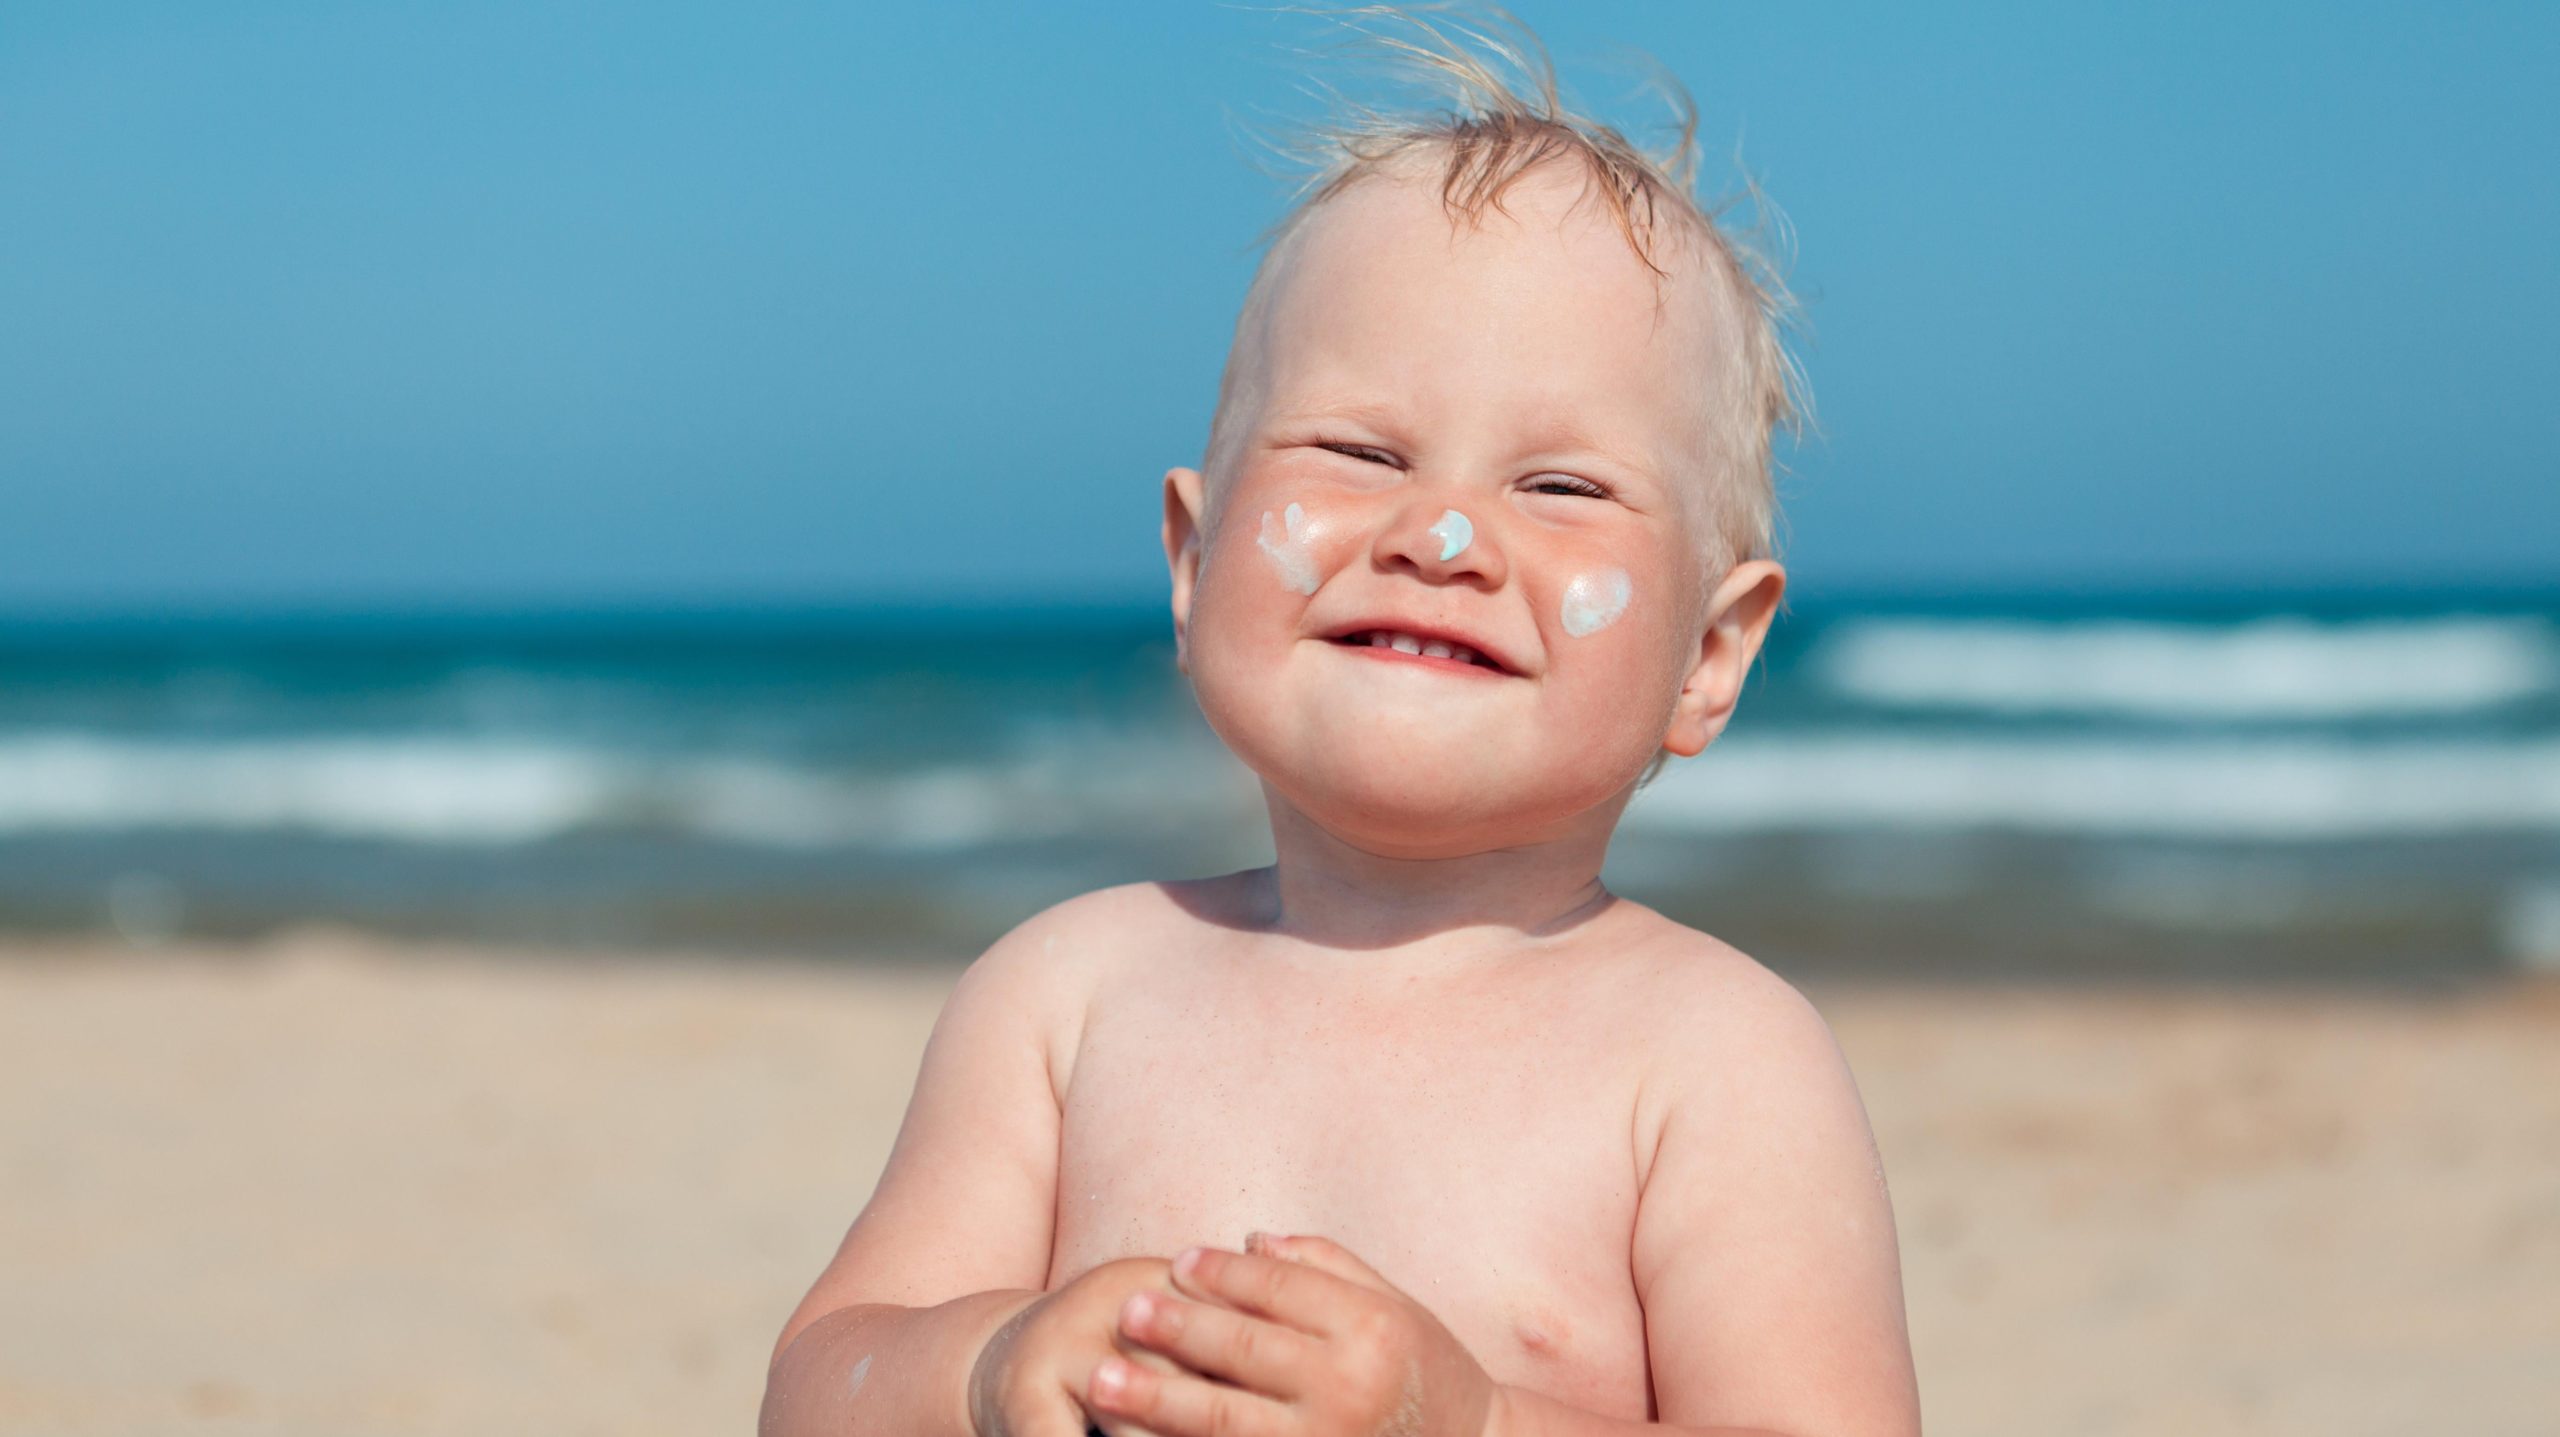 How to Get Sunscreen on Your Kid Without a Battle